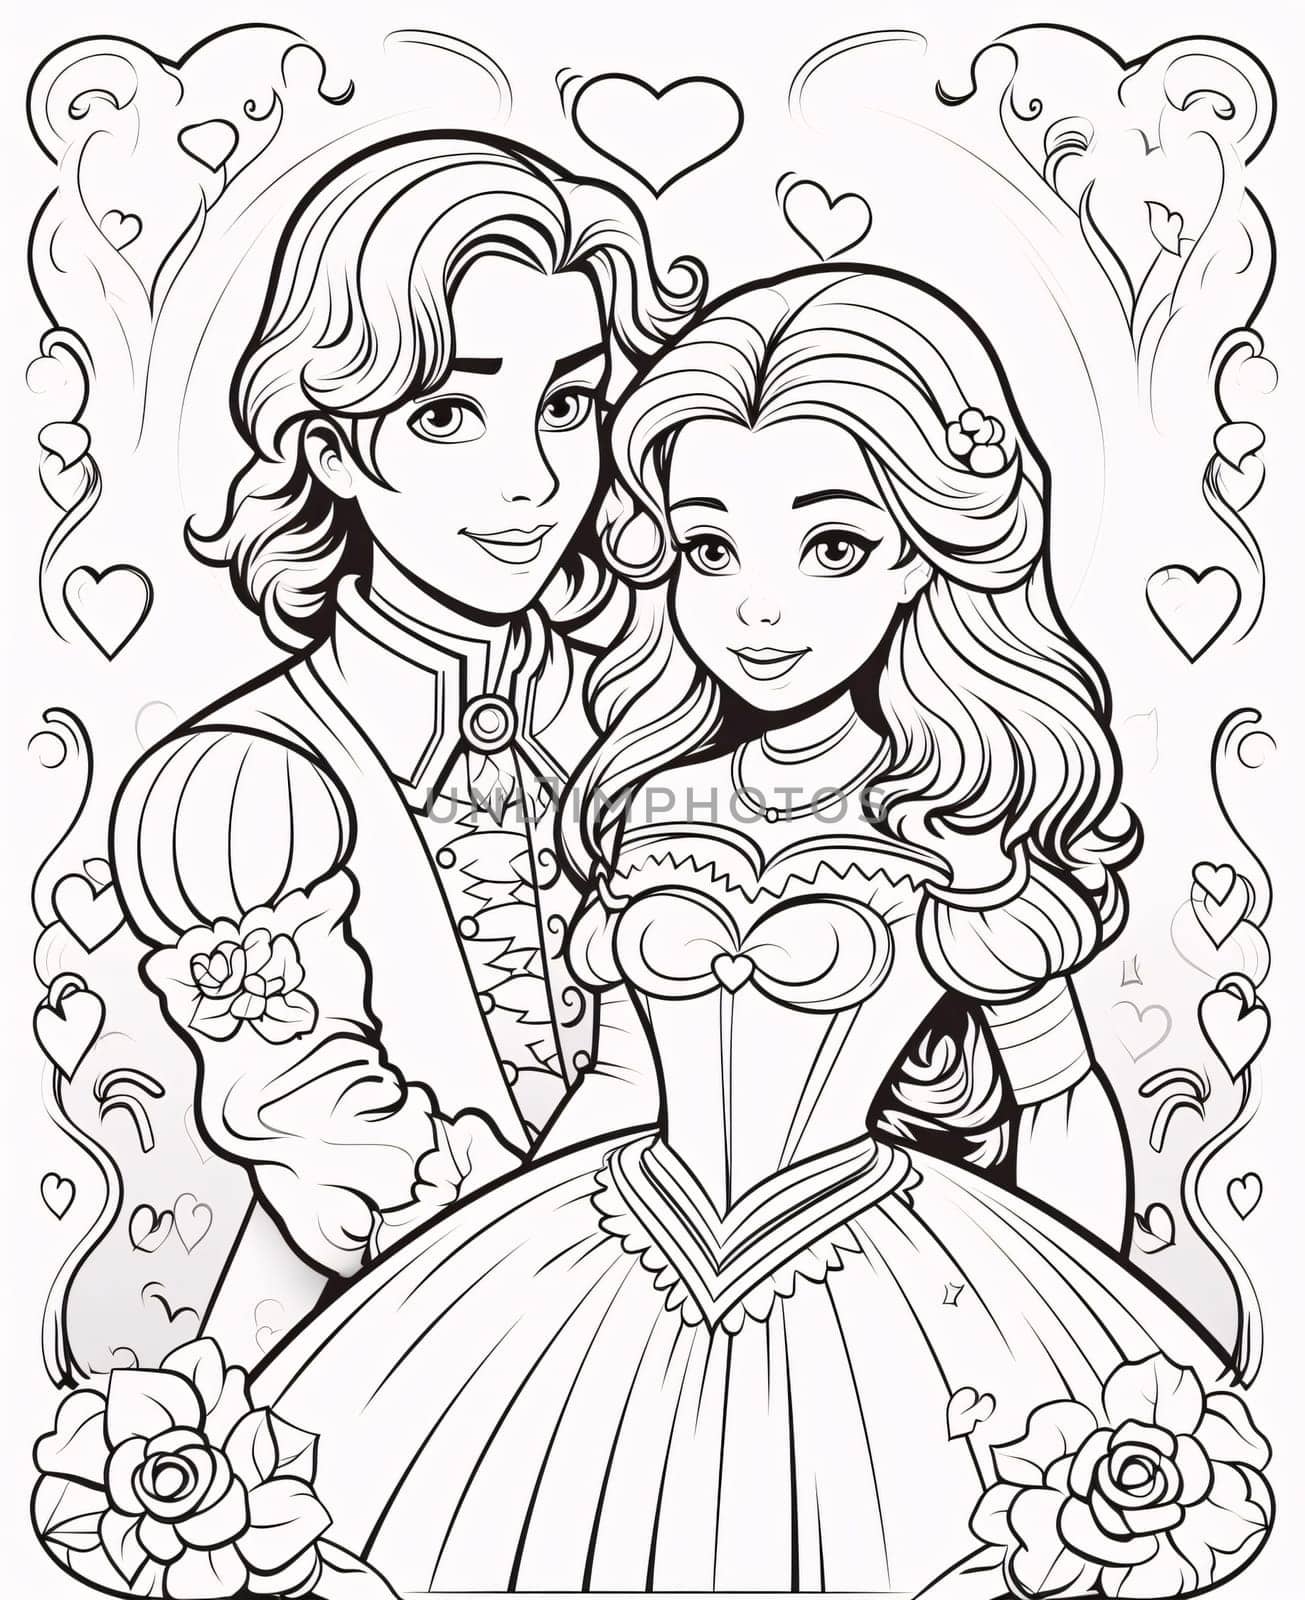 Black and white coloring sheet, a young prince and a princess. Valentine's Day as a day symbol of affection and love. A time of falling in love and love.